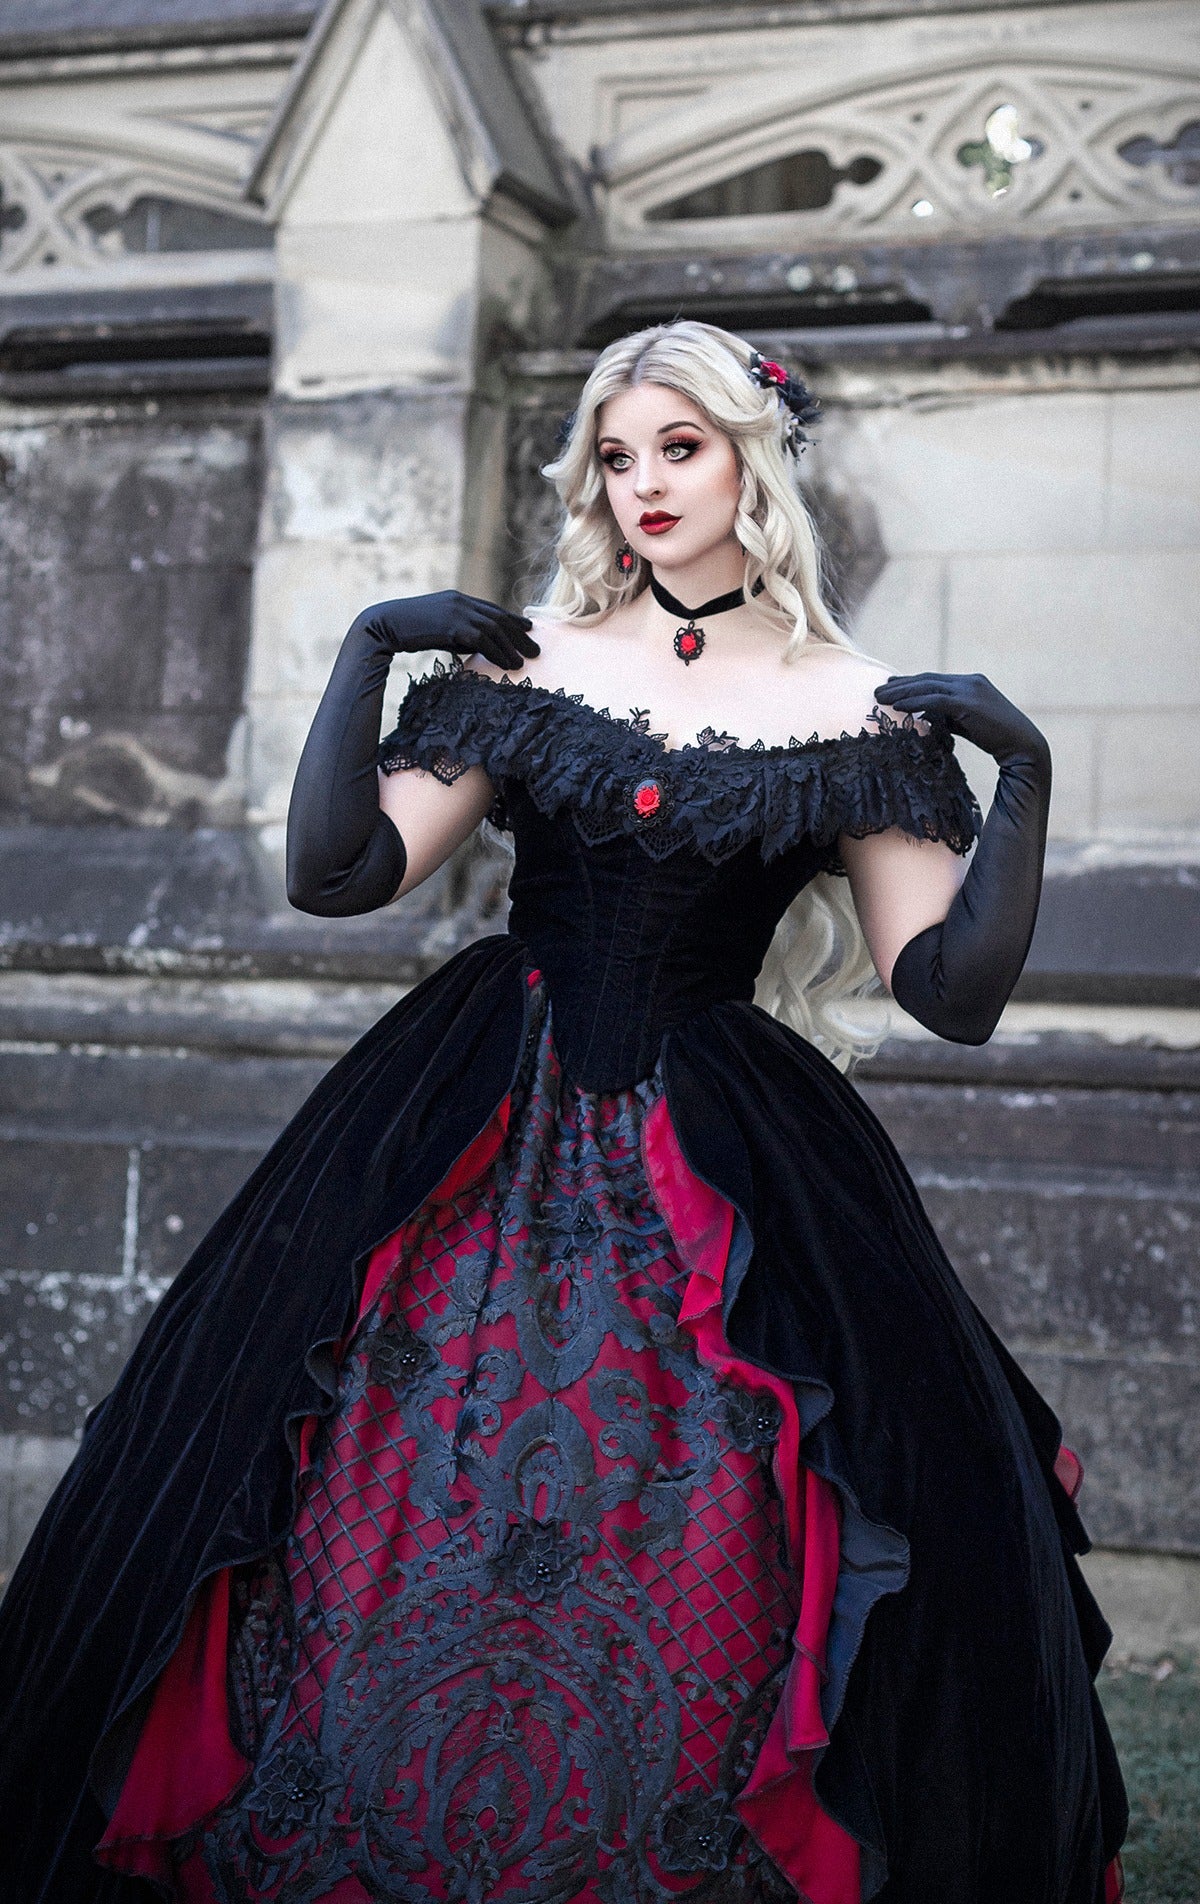 Black Red Long Gothic Prom Dress D1033 - D-RoseBlooming